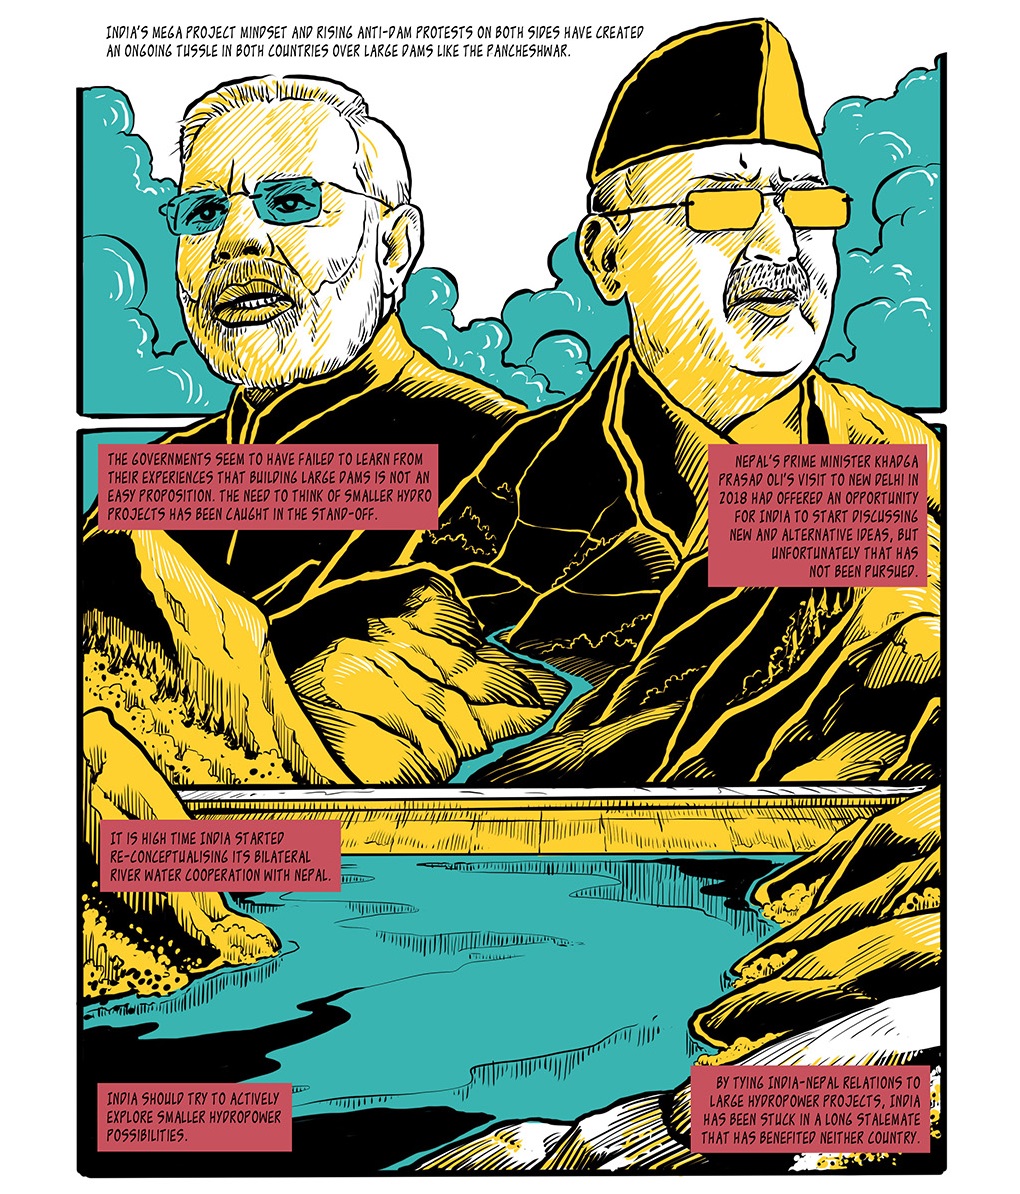 india-nepal graphic. India's megaproject mindset and rising anti-dam protests on both sides have created an ongoing tussle in both countries over large dams like the pancheswar